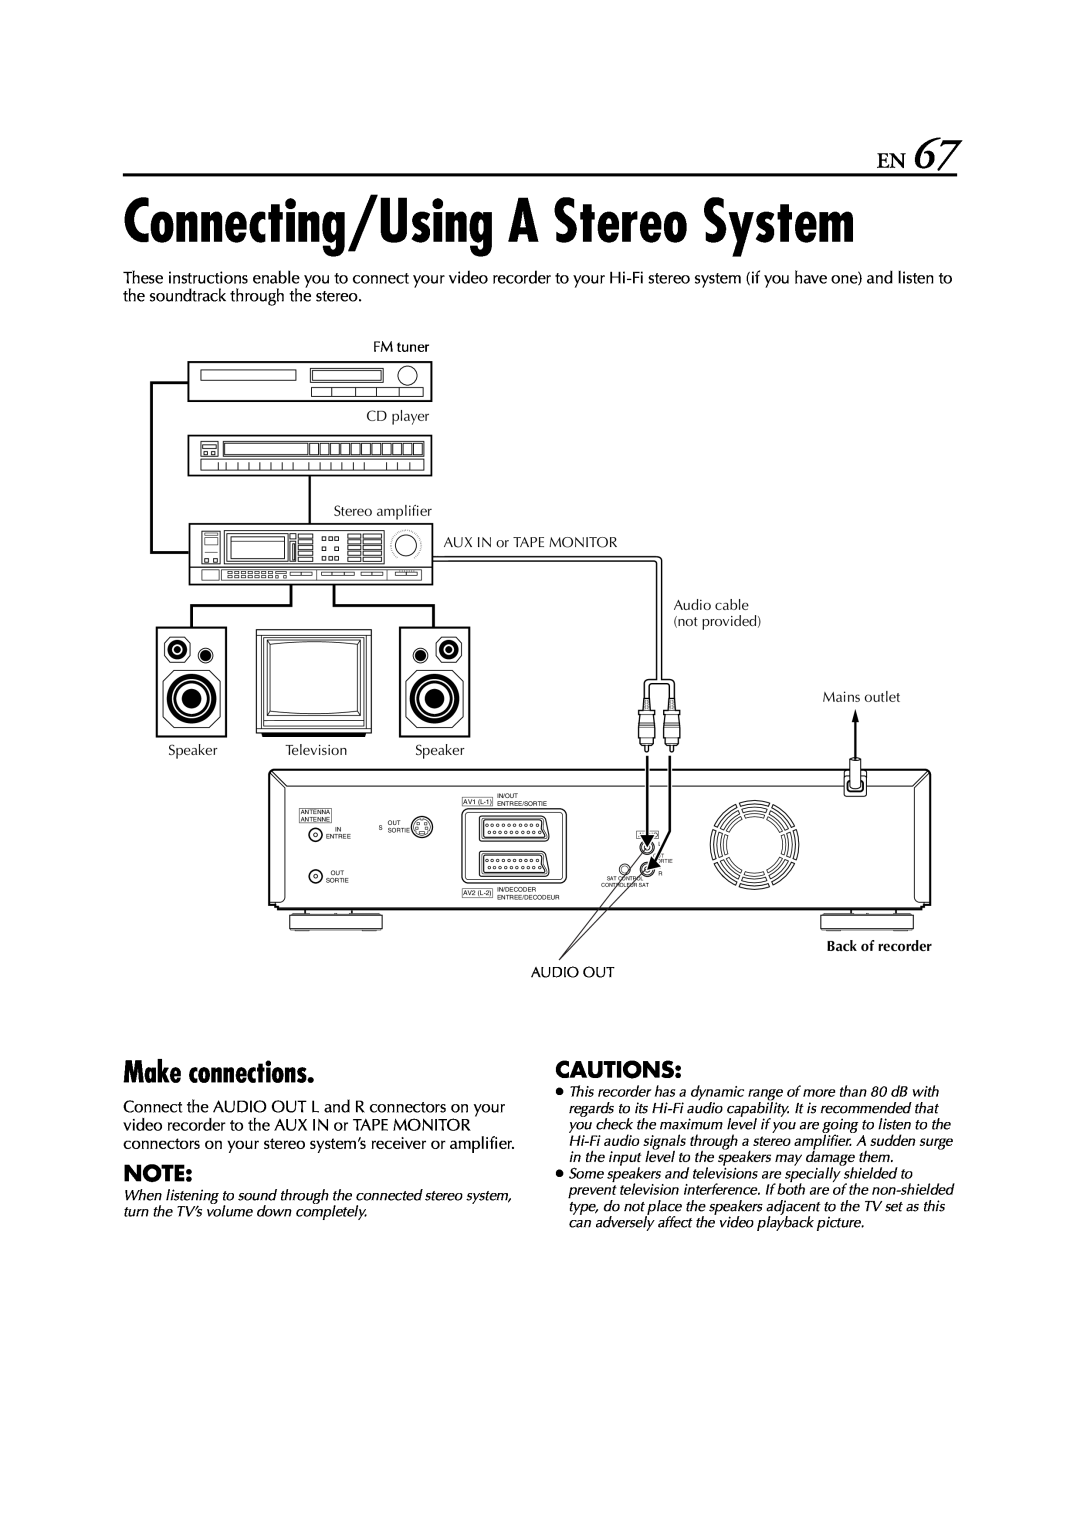 JVC LPT0616-001A Connecting/Using A Stereo System, Make connections, Cautions, AUX IN or TAPE MONITOR, AV1 L-1, In/Out 